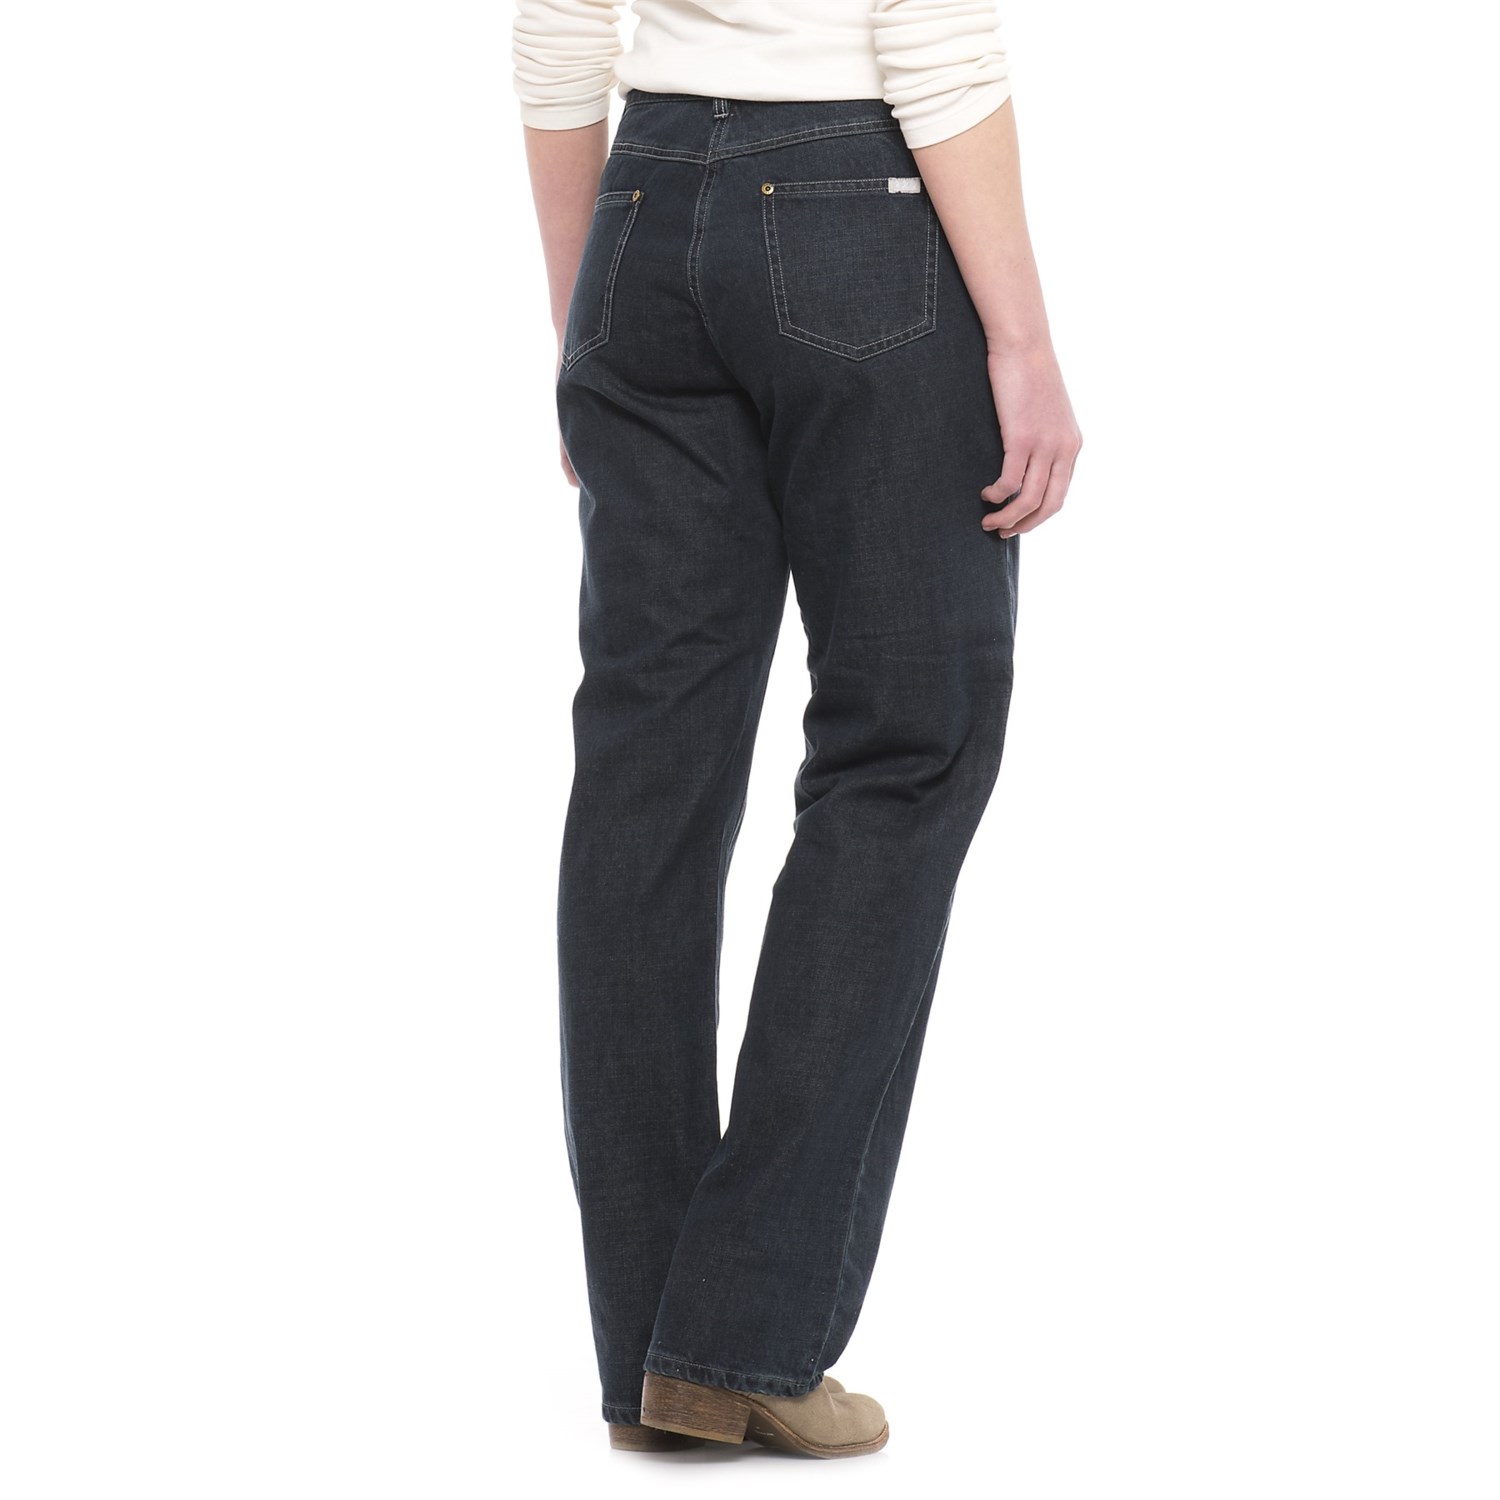 Woolrich Flannel-Lined Curved Fit Jeans (For Women)